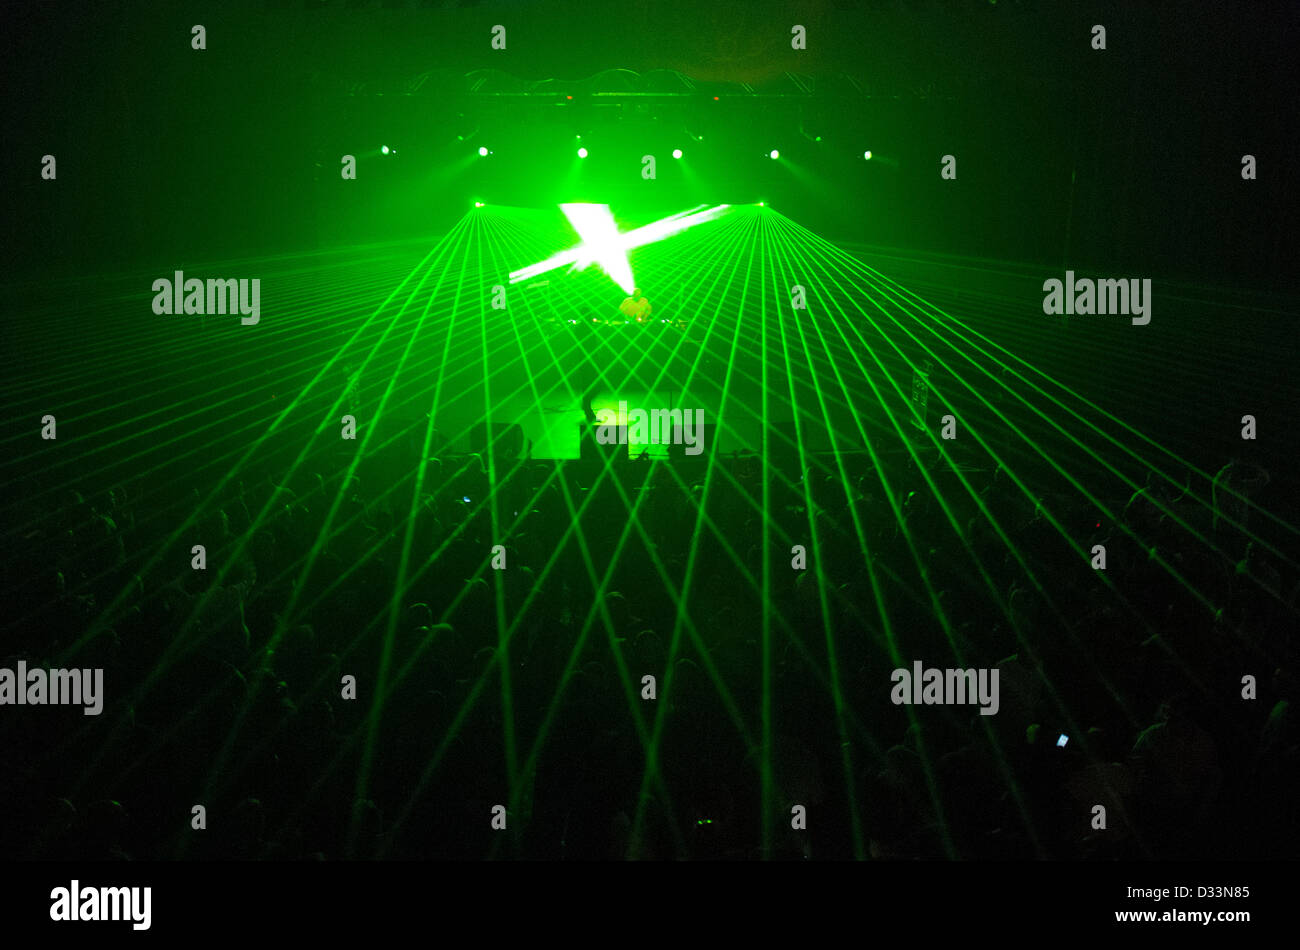 London Nightlife - Lasers covering the crowd at a concert Stock Photo